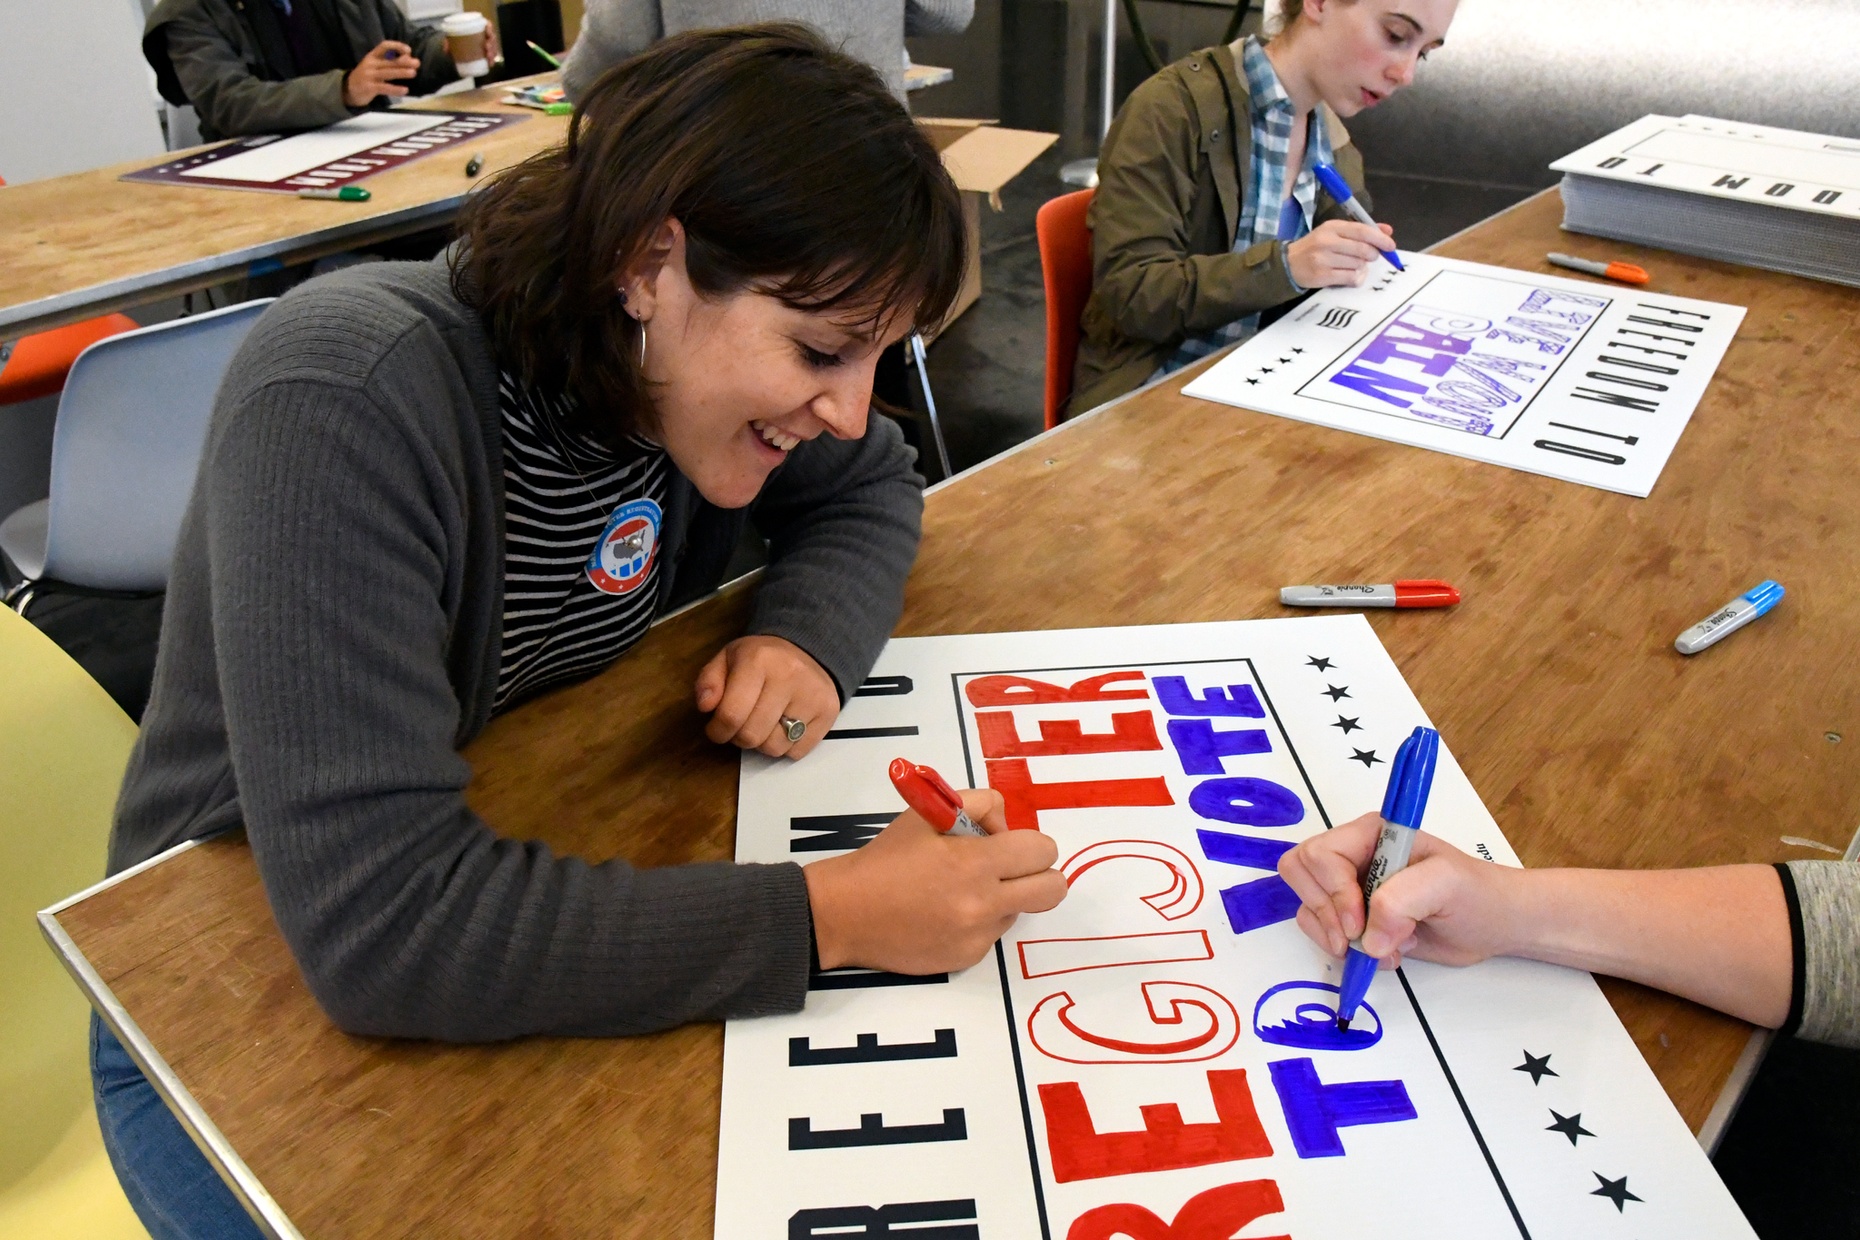 Two light-skinned people working on a sign with "Freedom to Register to Vote" written on it.